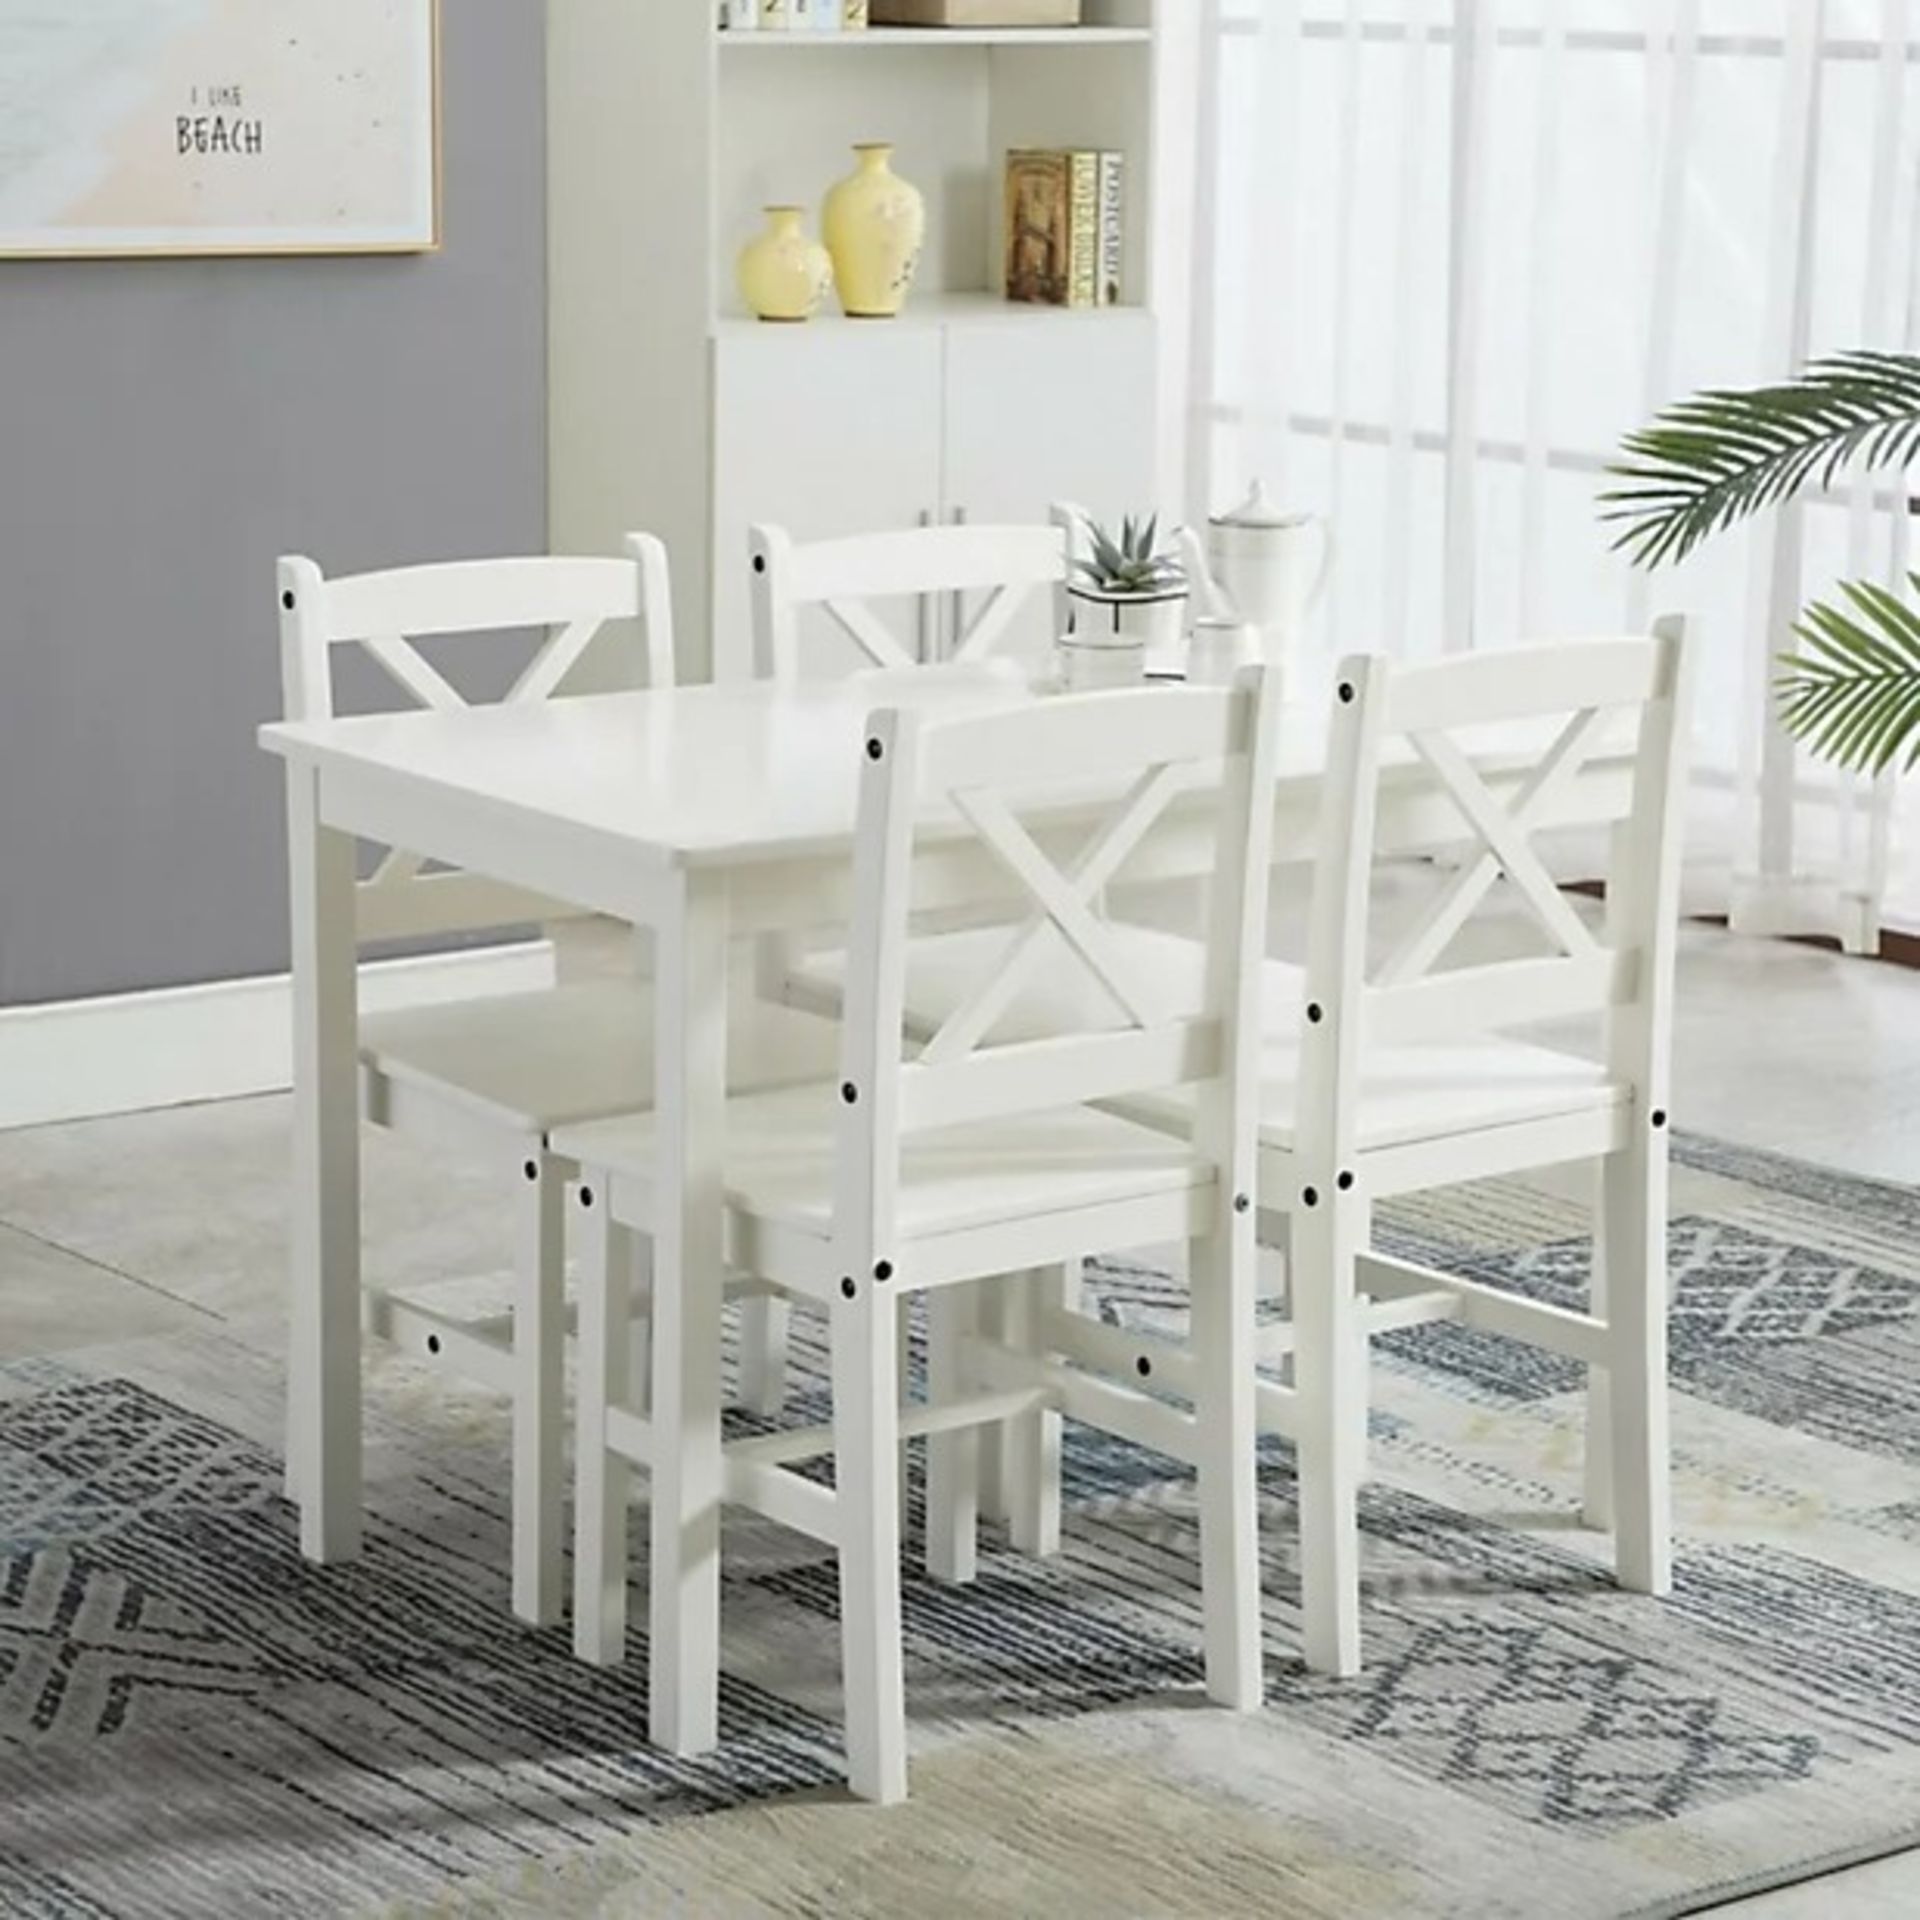 Solid Wooden Kitchen Dining Table and 4 Chairs Set White by MCC - ER41